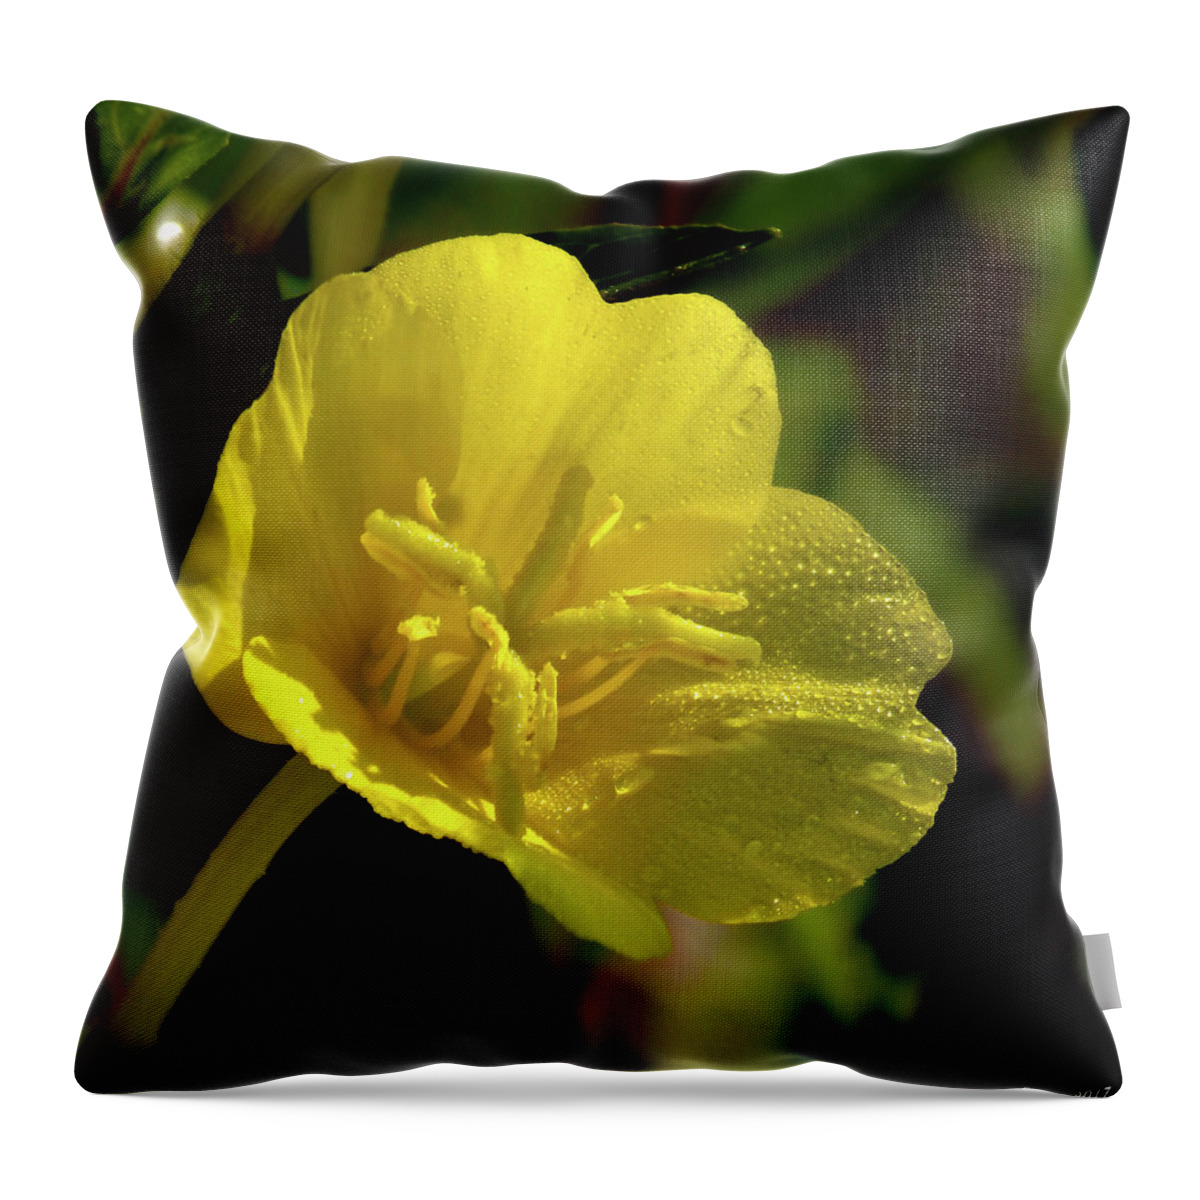 Oenothera Biennis Throw Pillow featuring the photograph Evening Primrose by Wild Thing